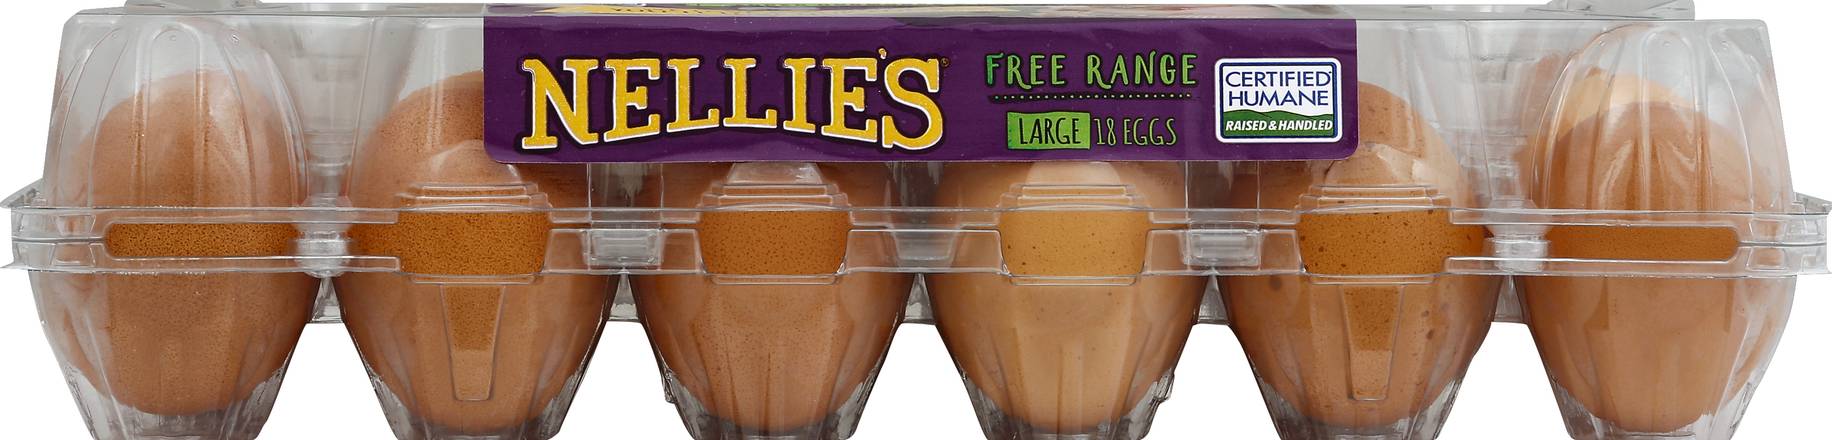 Nellie's Free Range Grade a Large Brown Eggs (18 ct)